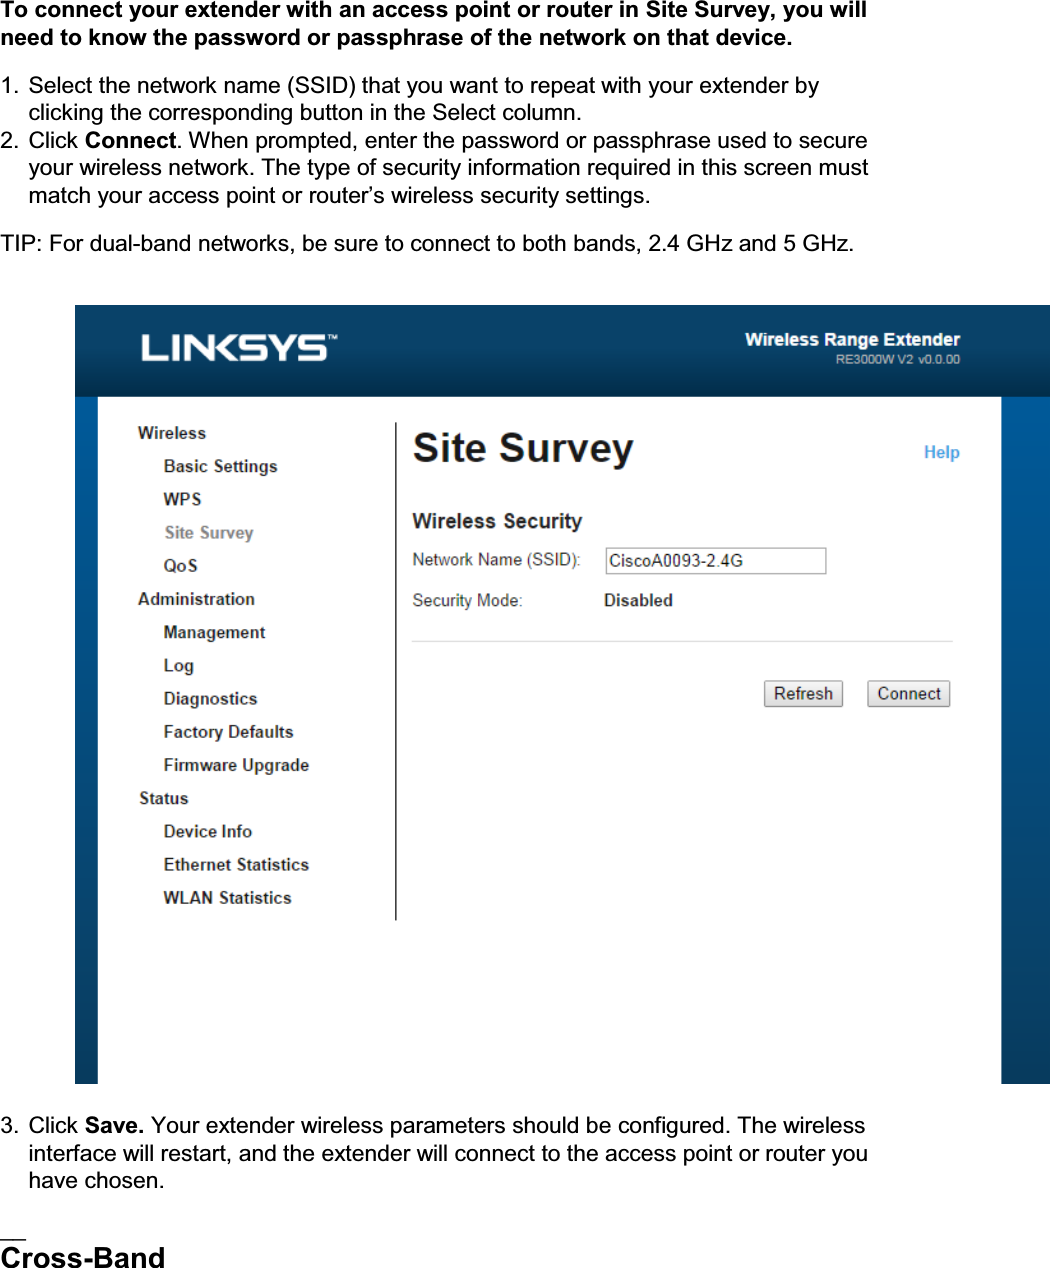 To connect your extender with an access point or router in Site Survey, you will need to know the password or passphrase of the network on that device. 1. Select the network name (SSID) that you want to repeat with your extender by clicking the corresponding button in the Select column. 2. Click Connect. When prompted, enter the password or passphrase used to secure your wireless network. The type of security information required in this screen must PDWFK\RXUDFFHVVSRLQWRUURXWHU¶VZLUHOHVVVHFXULW\VHWWLQJV TIP: For dual-band networks, be sure to connect to both bands, 2.4 GHz and 5 GHz.    3. Click Save. Your extender wireless parameters should be configured. The wireless interface will restart, and the extender will connect to the access point or router you have chosen. __ Cross-Band 